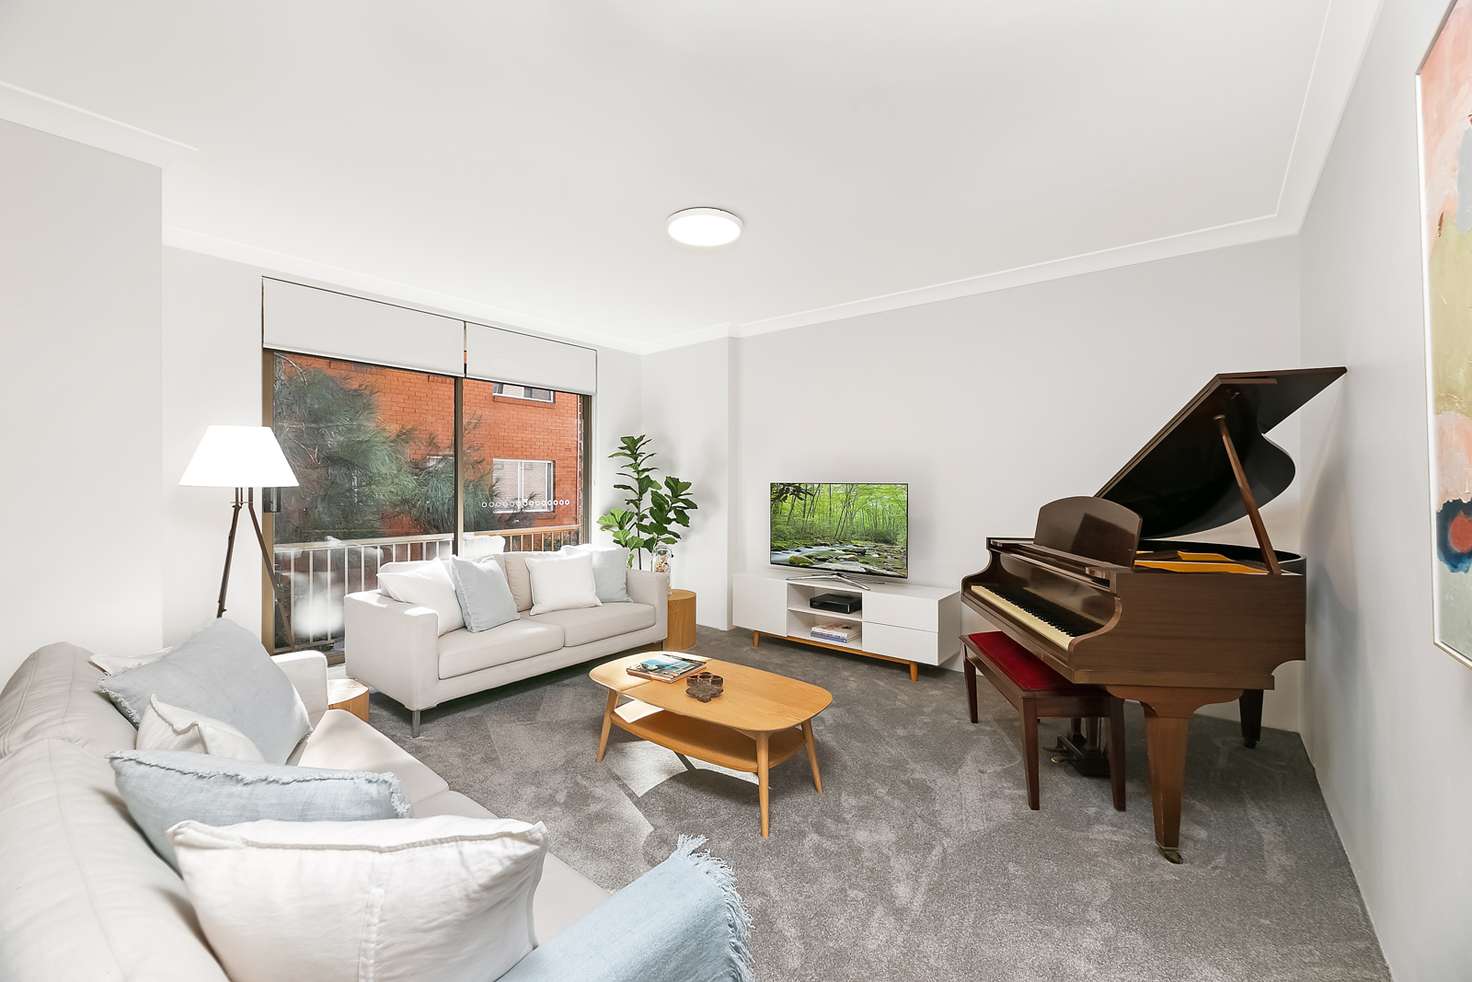 Main view of Homely apartment listing, 9/13-15 Ocean Street North, Bondi NSW 2026